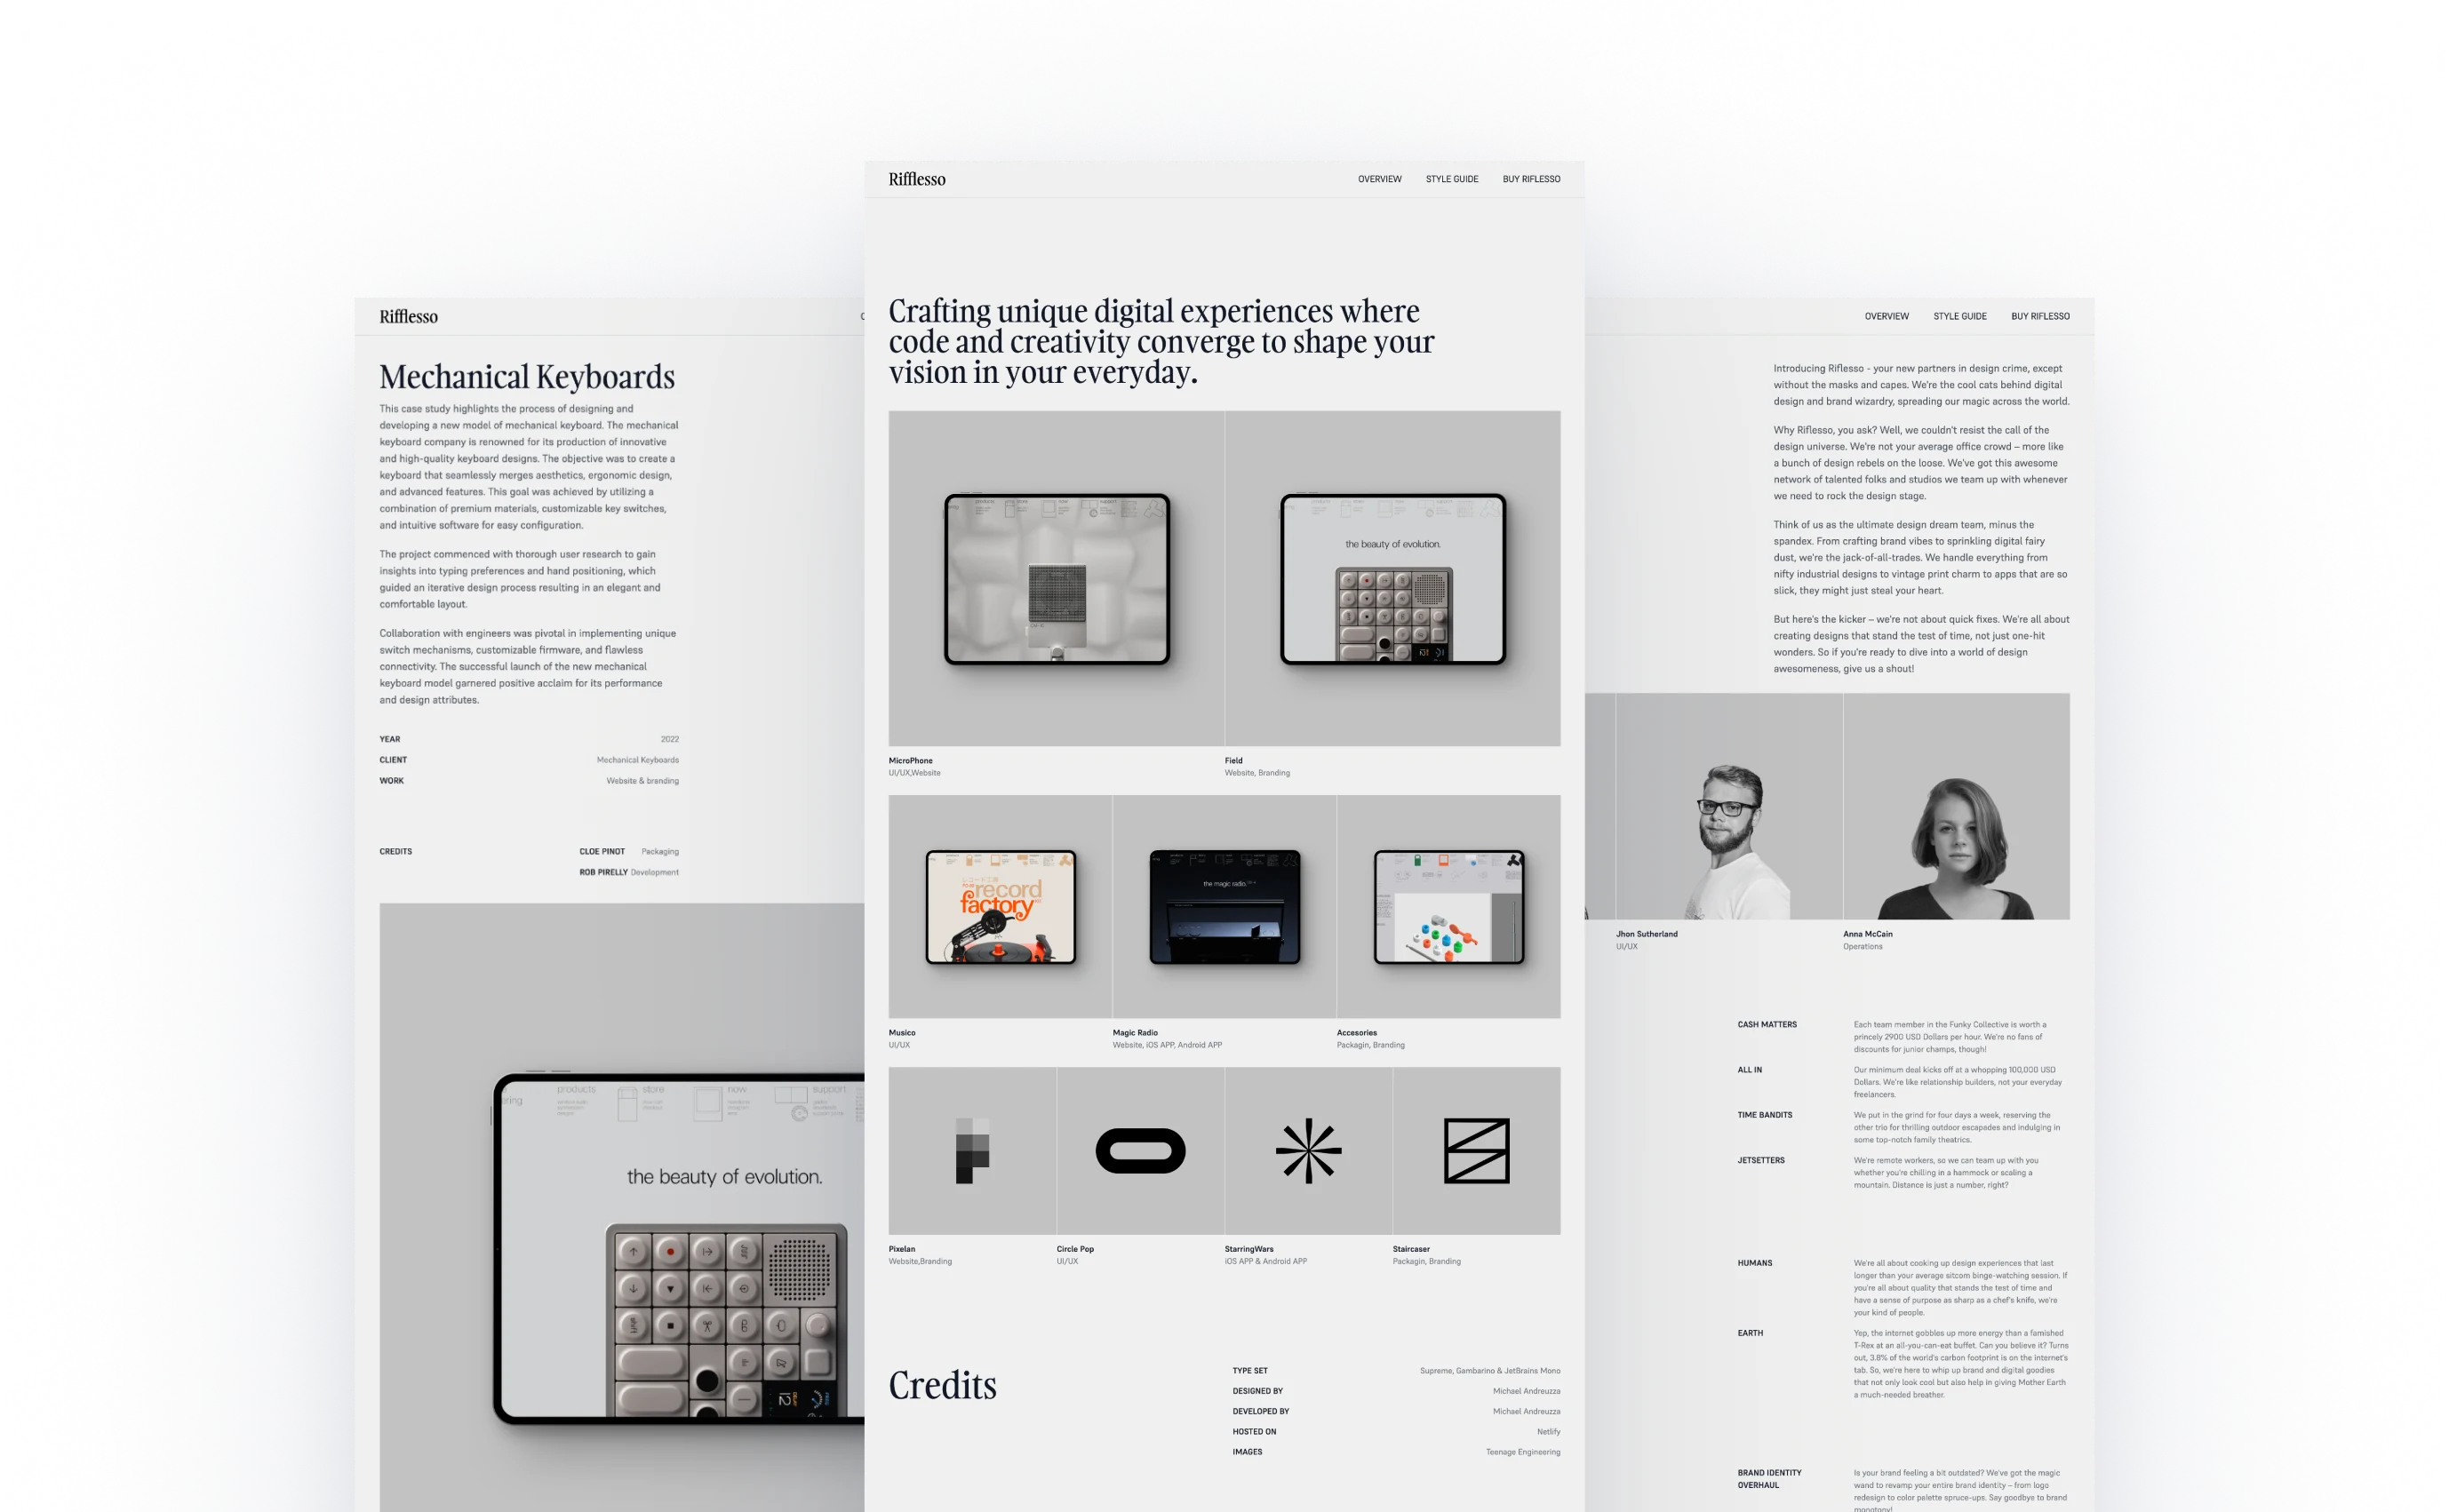 Riflesso theme presenting a professional portfolio, with a grayscale design showcasing mechanical keyboards, digital interfaces, and product designs. Includes detailed project descriptions, images of design work, and credits, along with profiles of design team members.